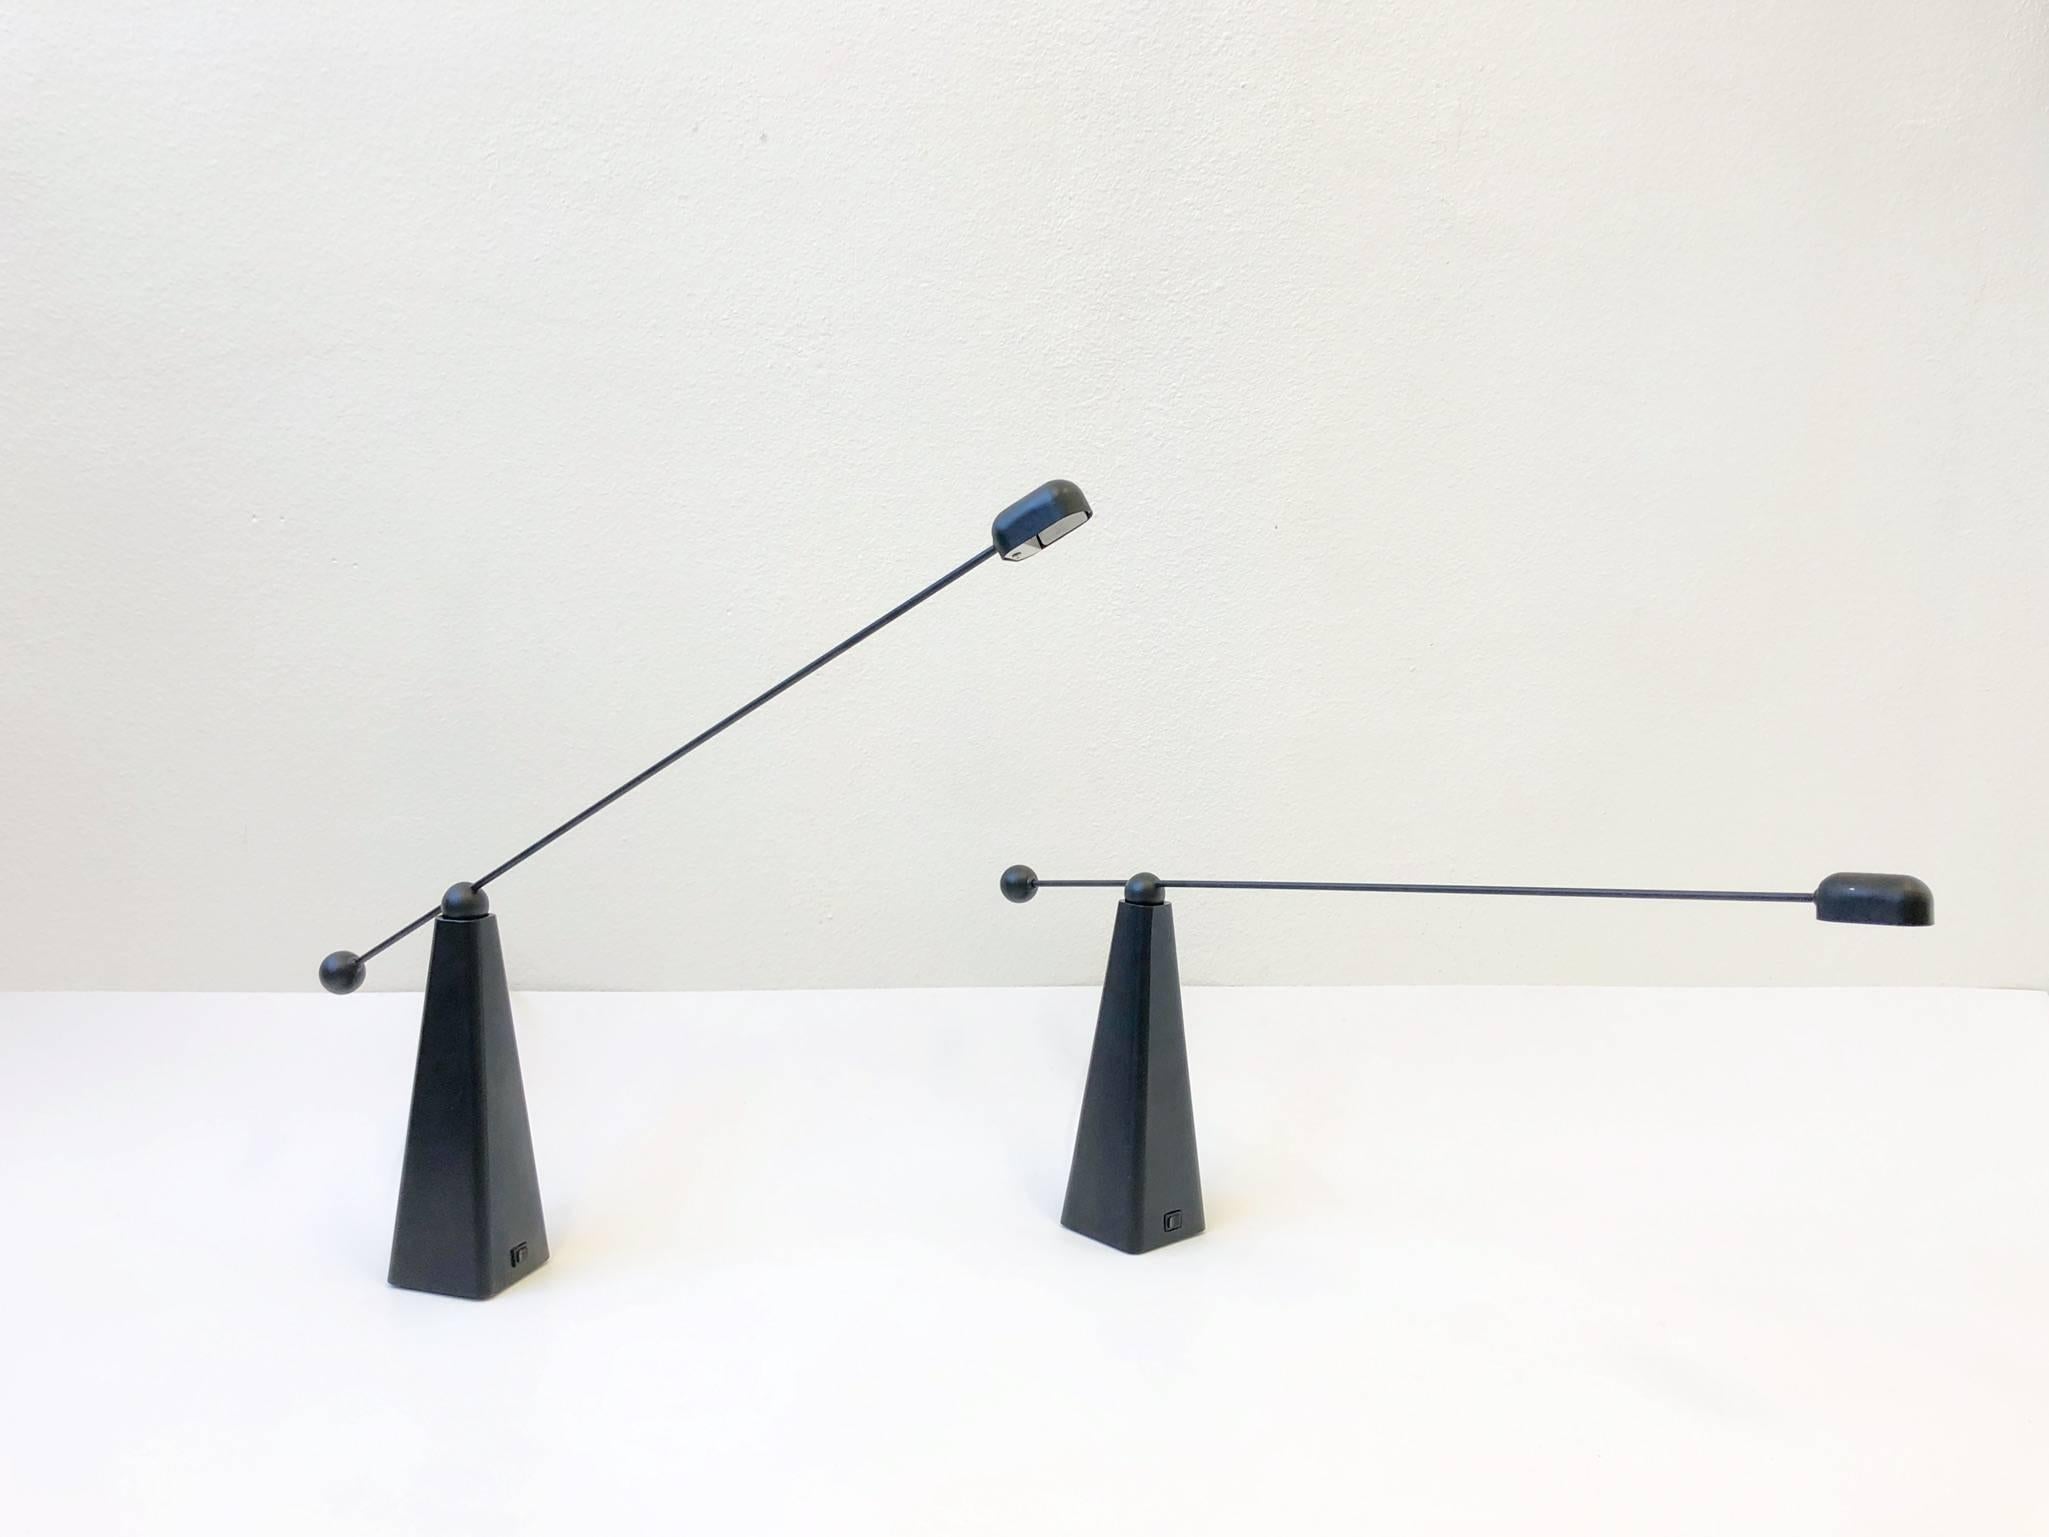 An amazing pair of 1980s black lacquered adjustable table lamps by Ron Rezek.
The lamps are in amazing condition. They have a high/low dimmer and take a small 50w halogen bulb. The arm rotates 360, and move up and down.

Dimension: 32” wide, 4”